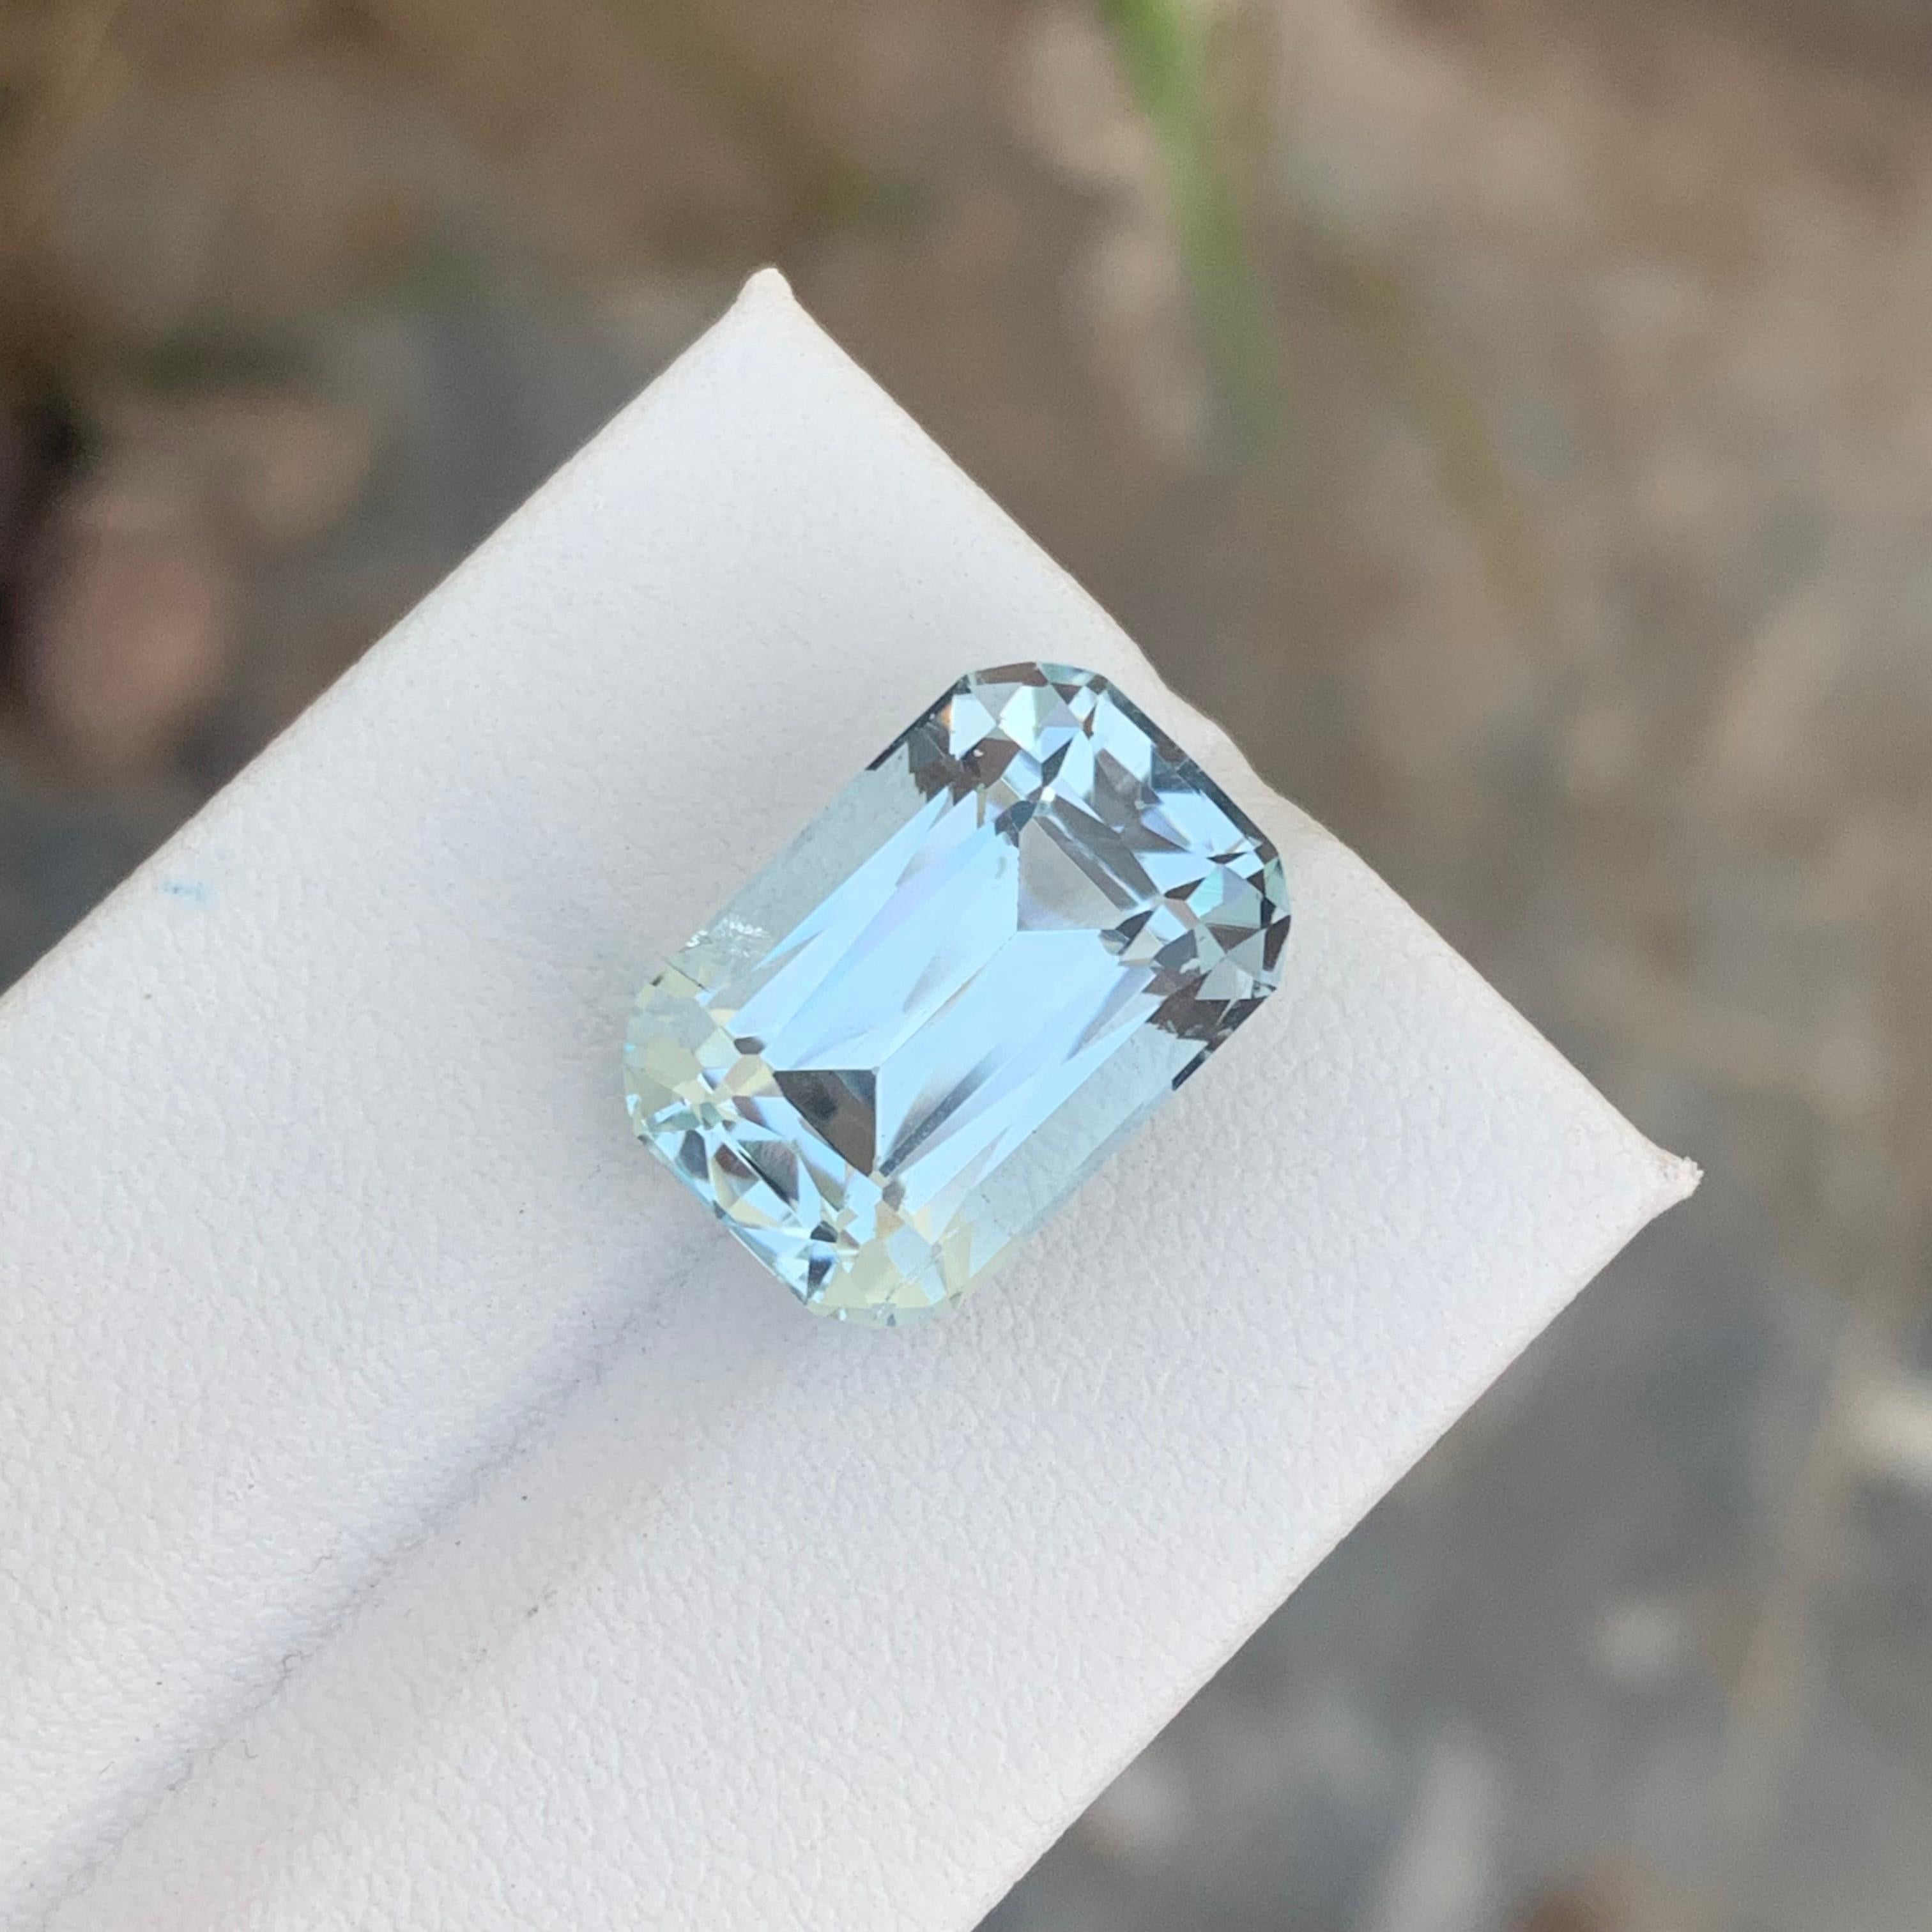 Loose Aquamarine 
Weight: 10.90 Carats 
Dimension: 15.7x10.6x9.3 Mm
Origin: Shigar Valley 
Shape: Cushion
Color: Light Blue
Treatment: Non / Natural 
Certificate: on client demand 
Aquamarine, often referred to as the 